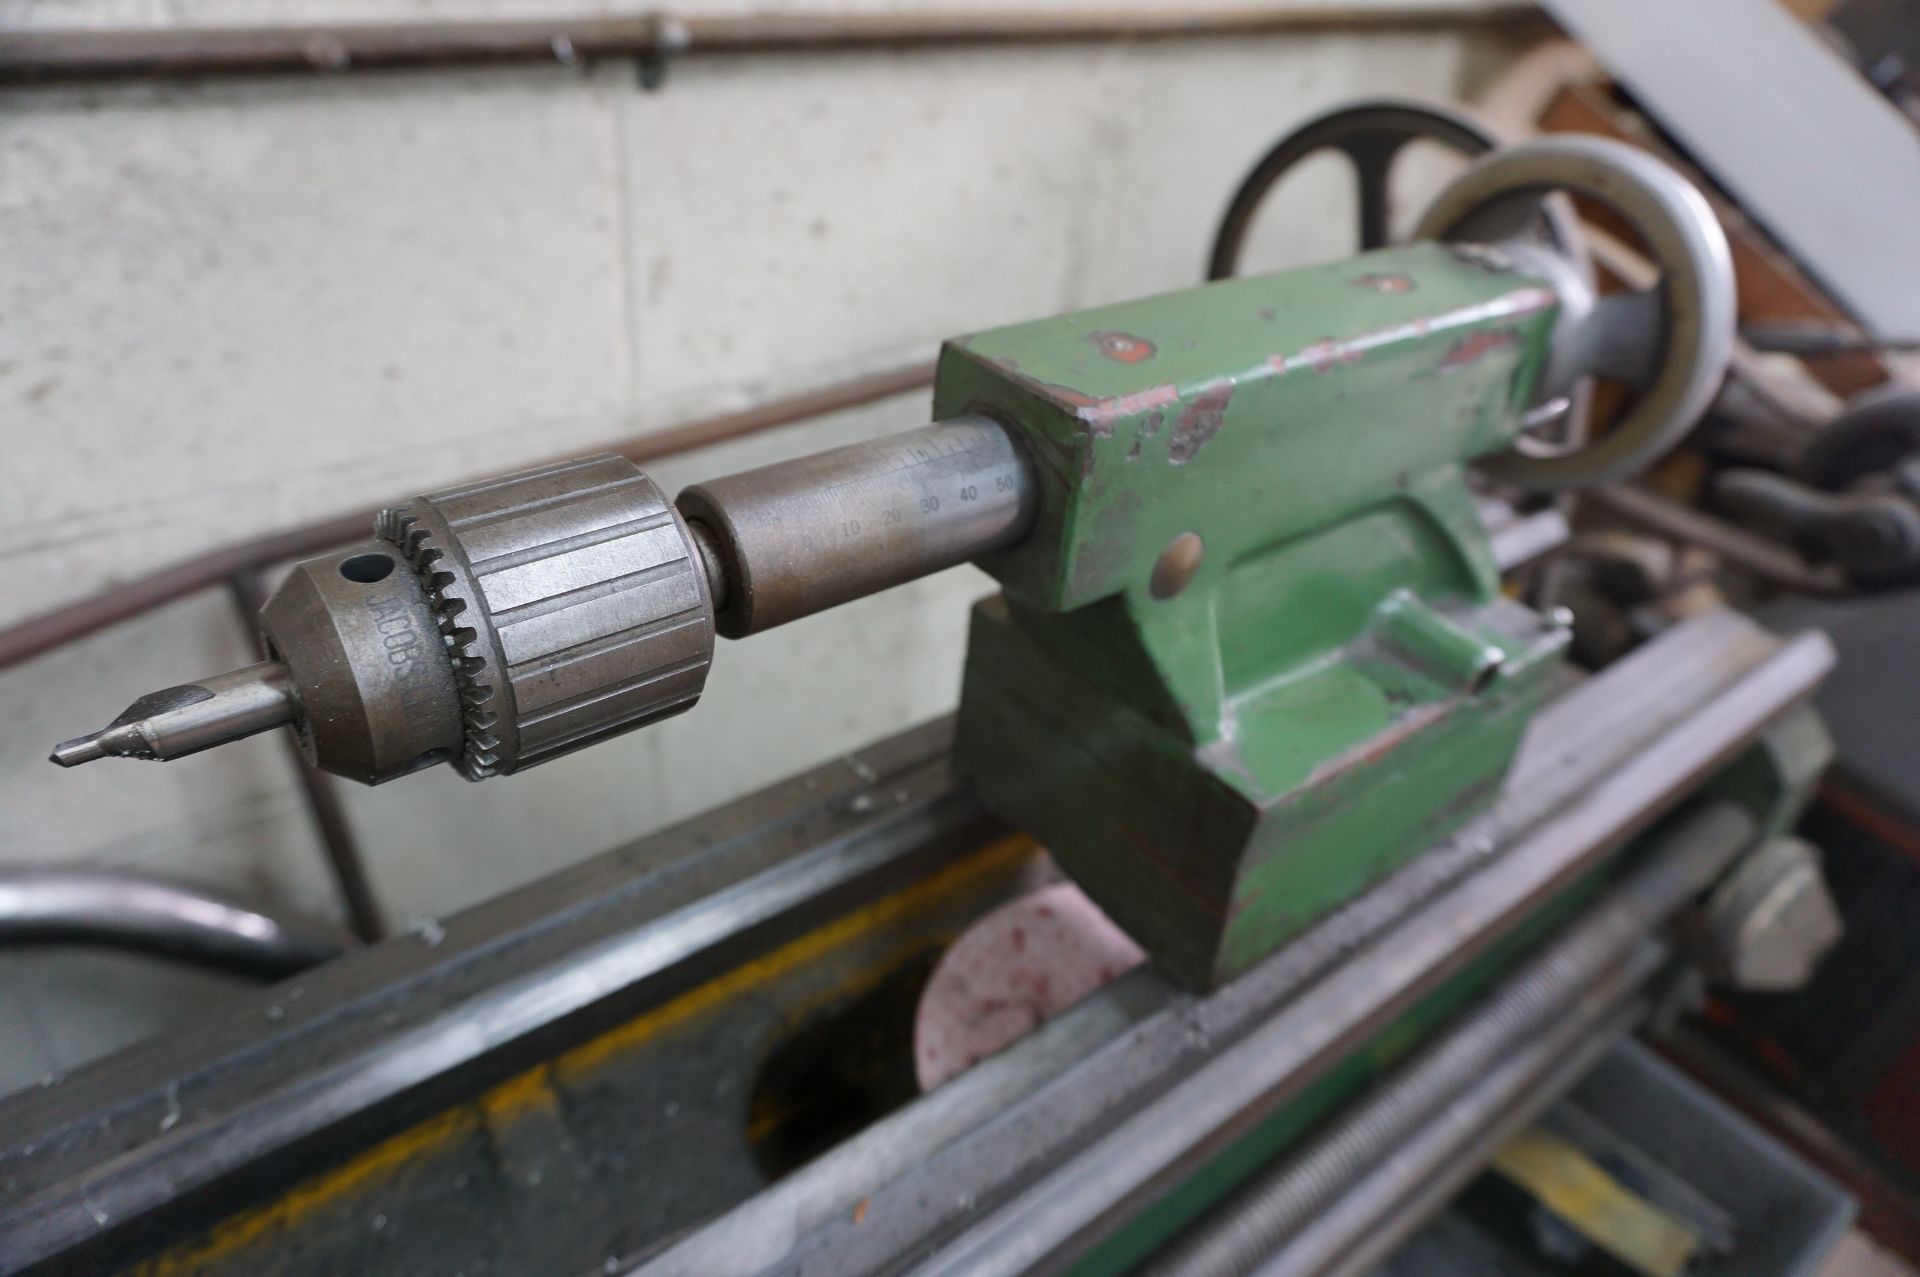 1984 ENCO MANUAL LATHE MODEL 02070 S/N 844107, 6" CHUCK, TAILSTOCK WITH JACOBS CHUCK - Image 6 of 9